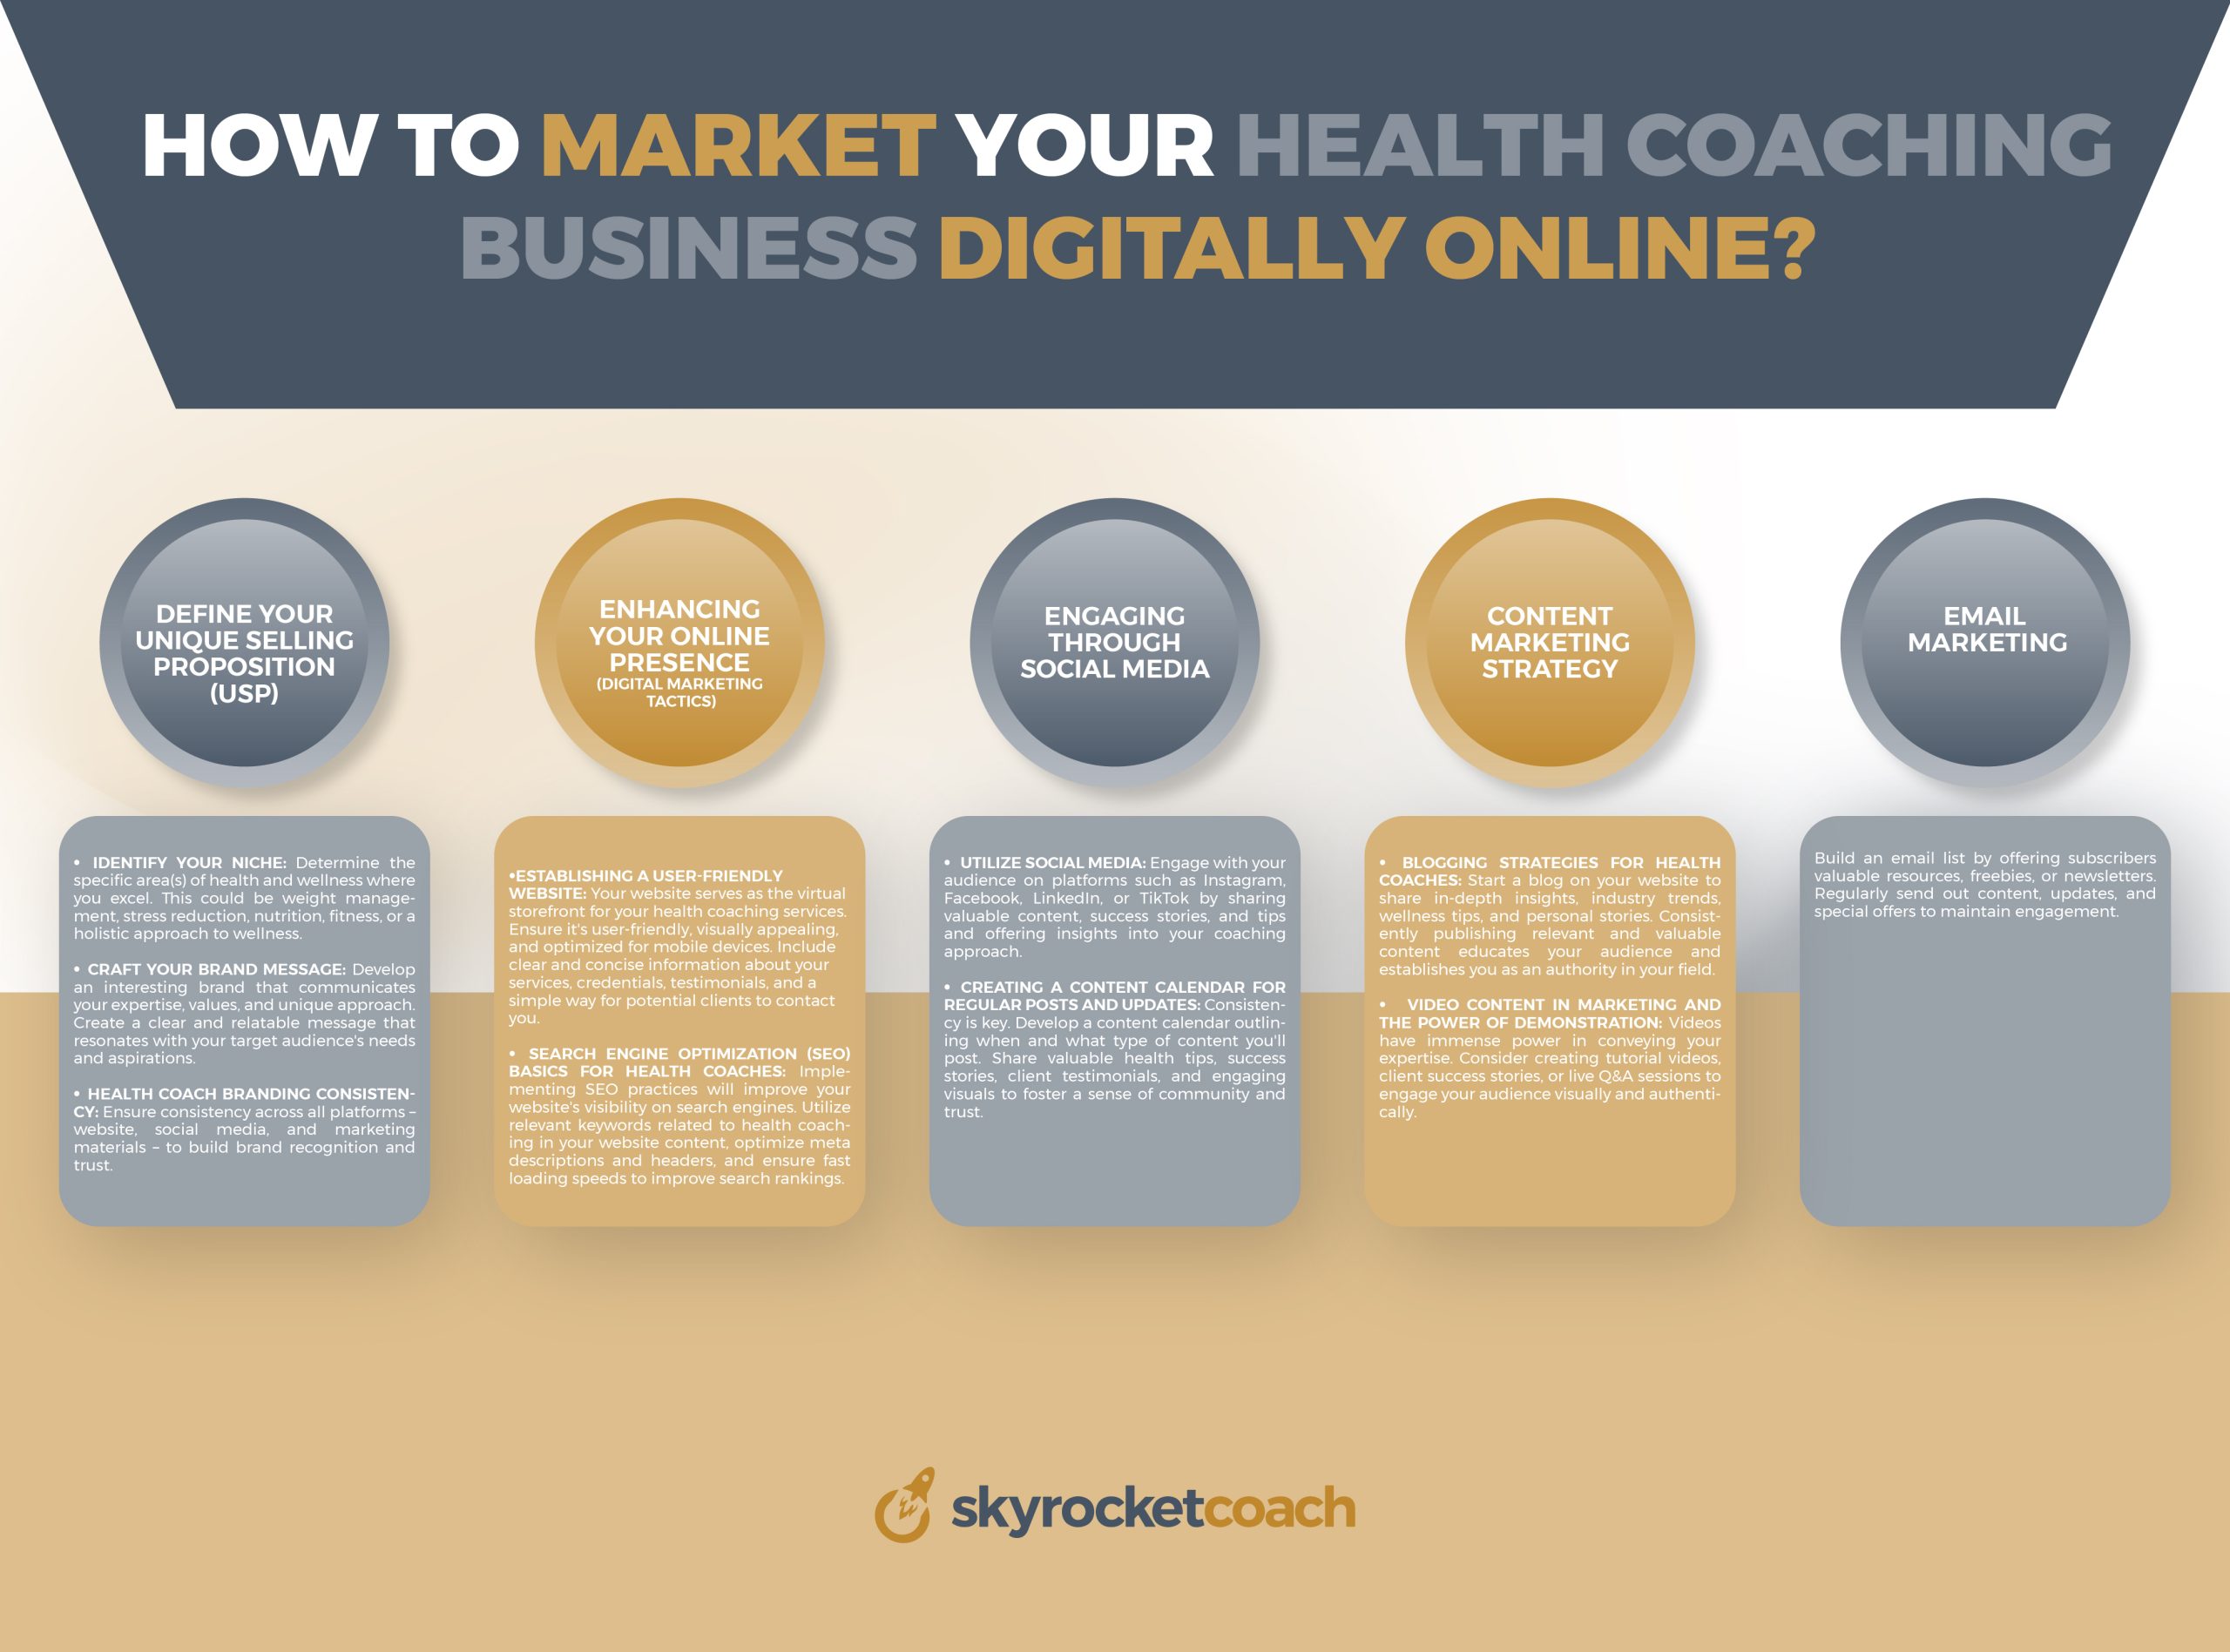 How To Market Your Health Coaching Business Digitally Online